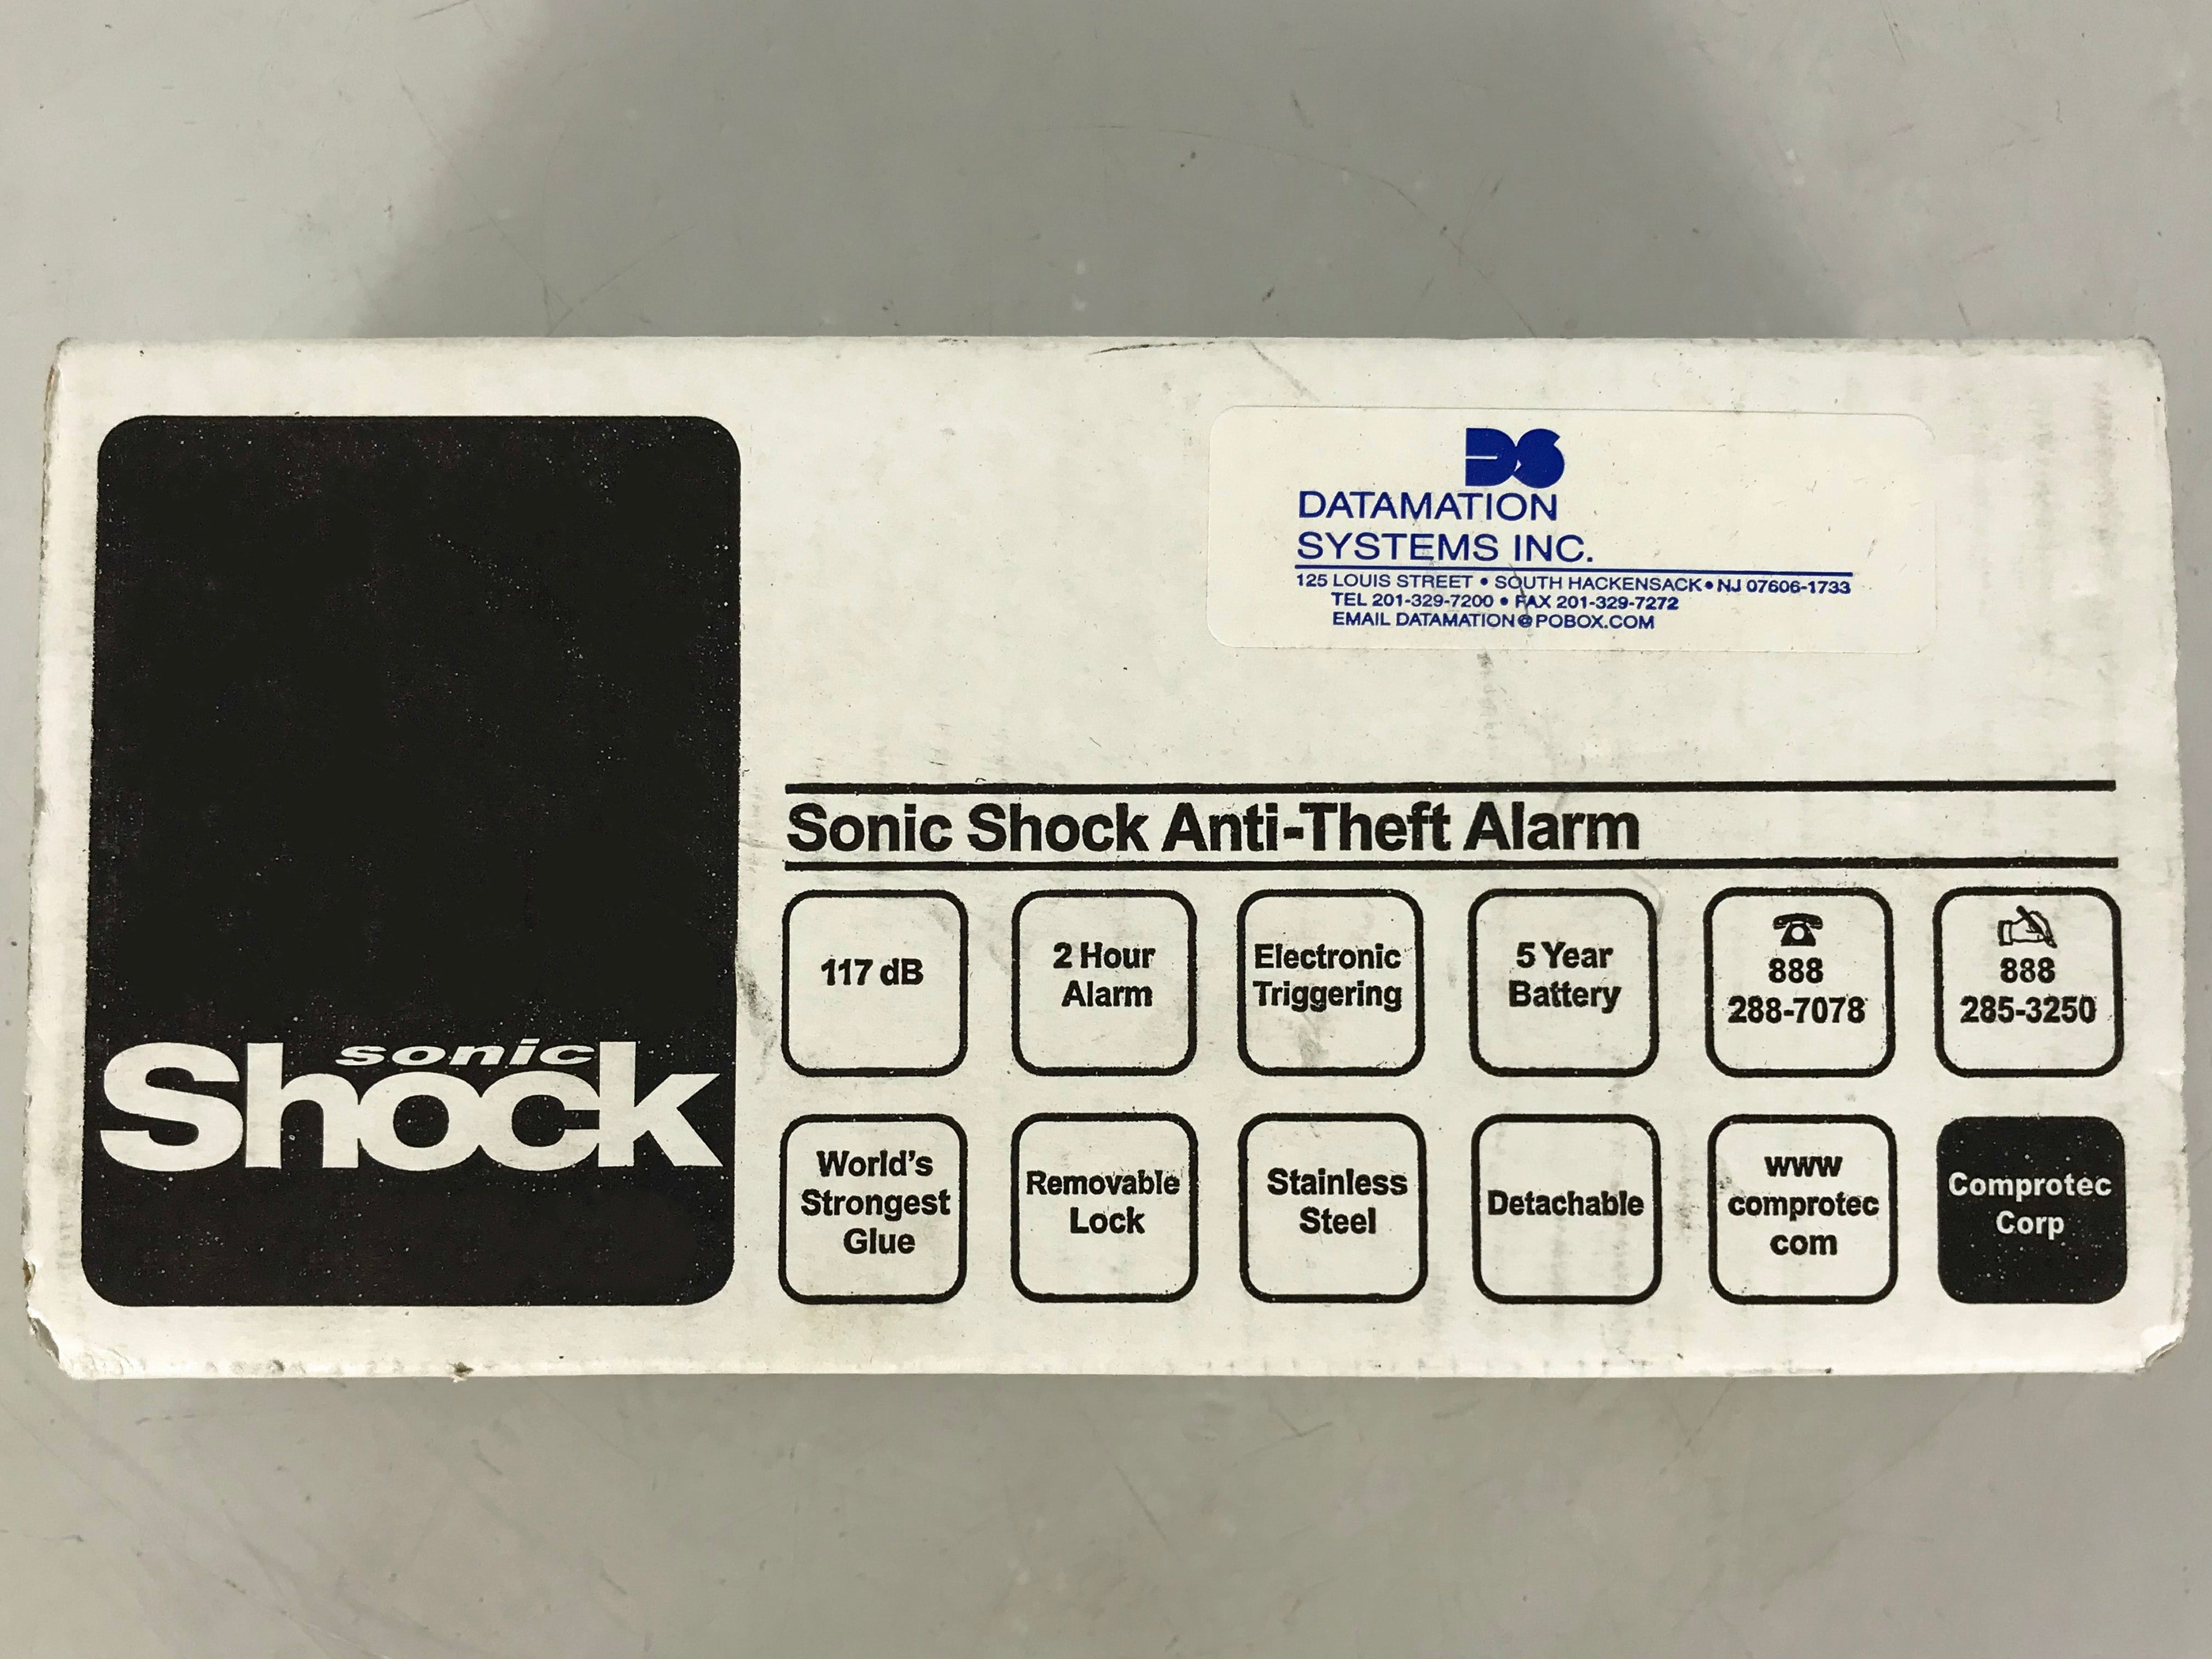 Sonic Shock 2 Anti-Theft Alarm for Monitors and Flat Screens